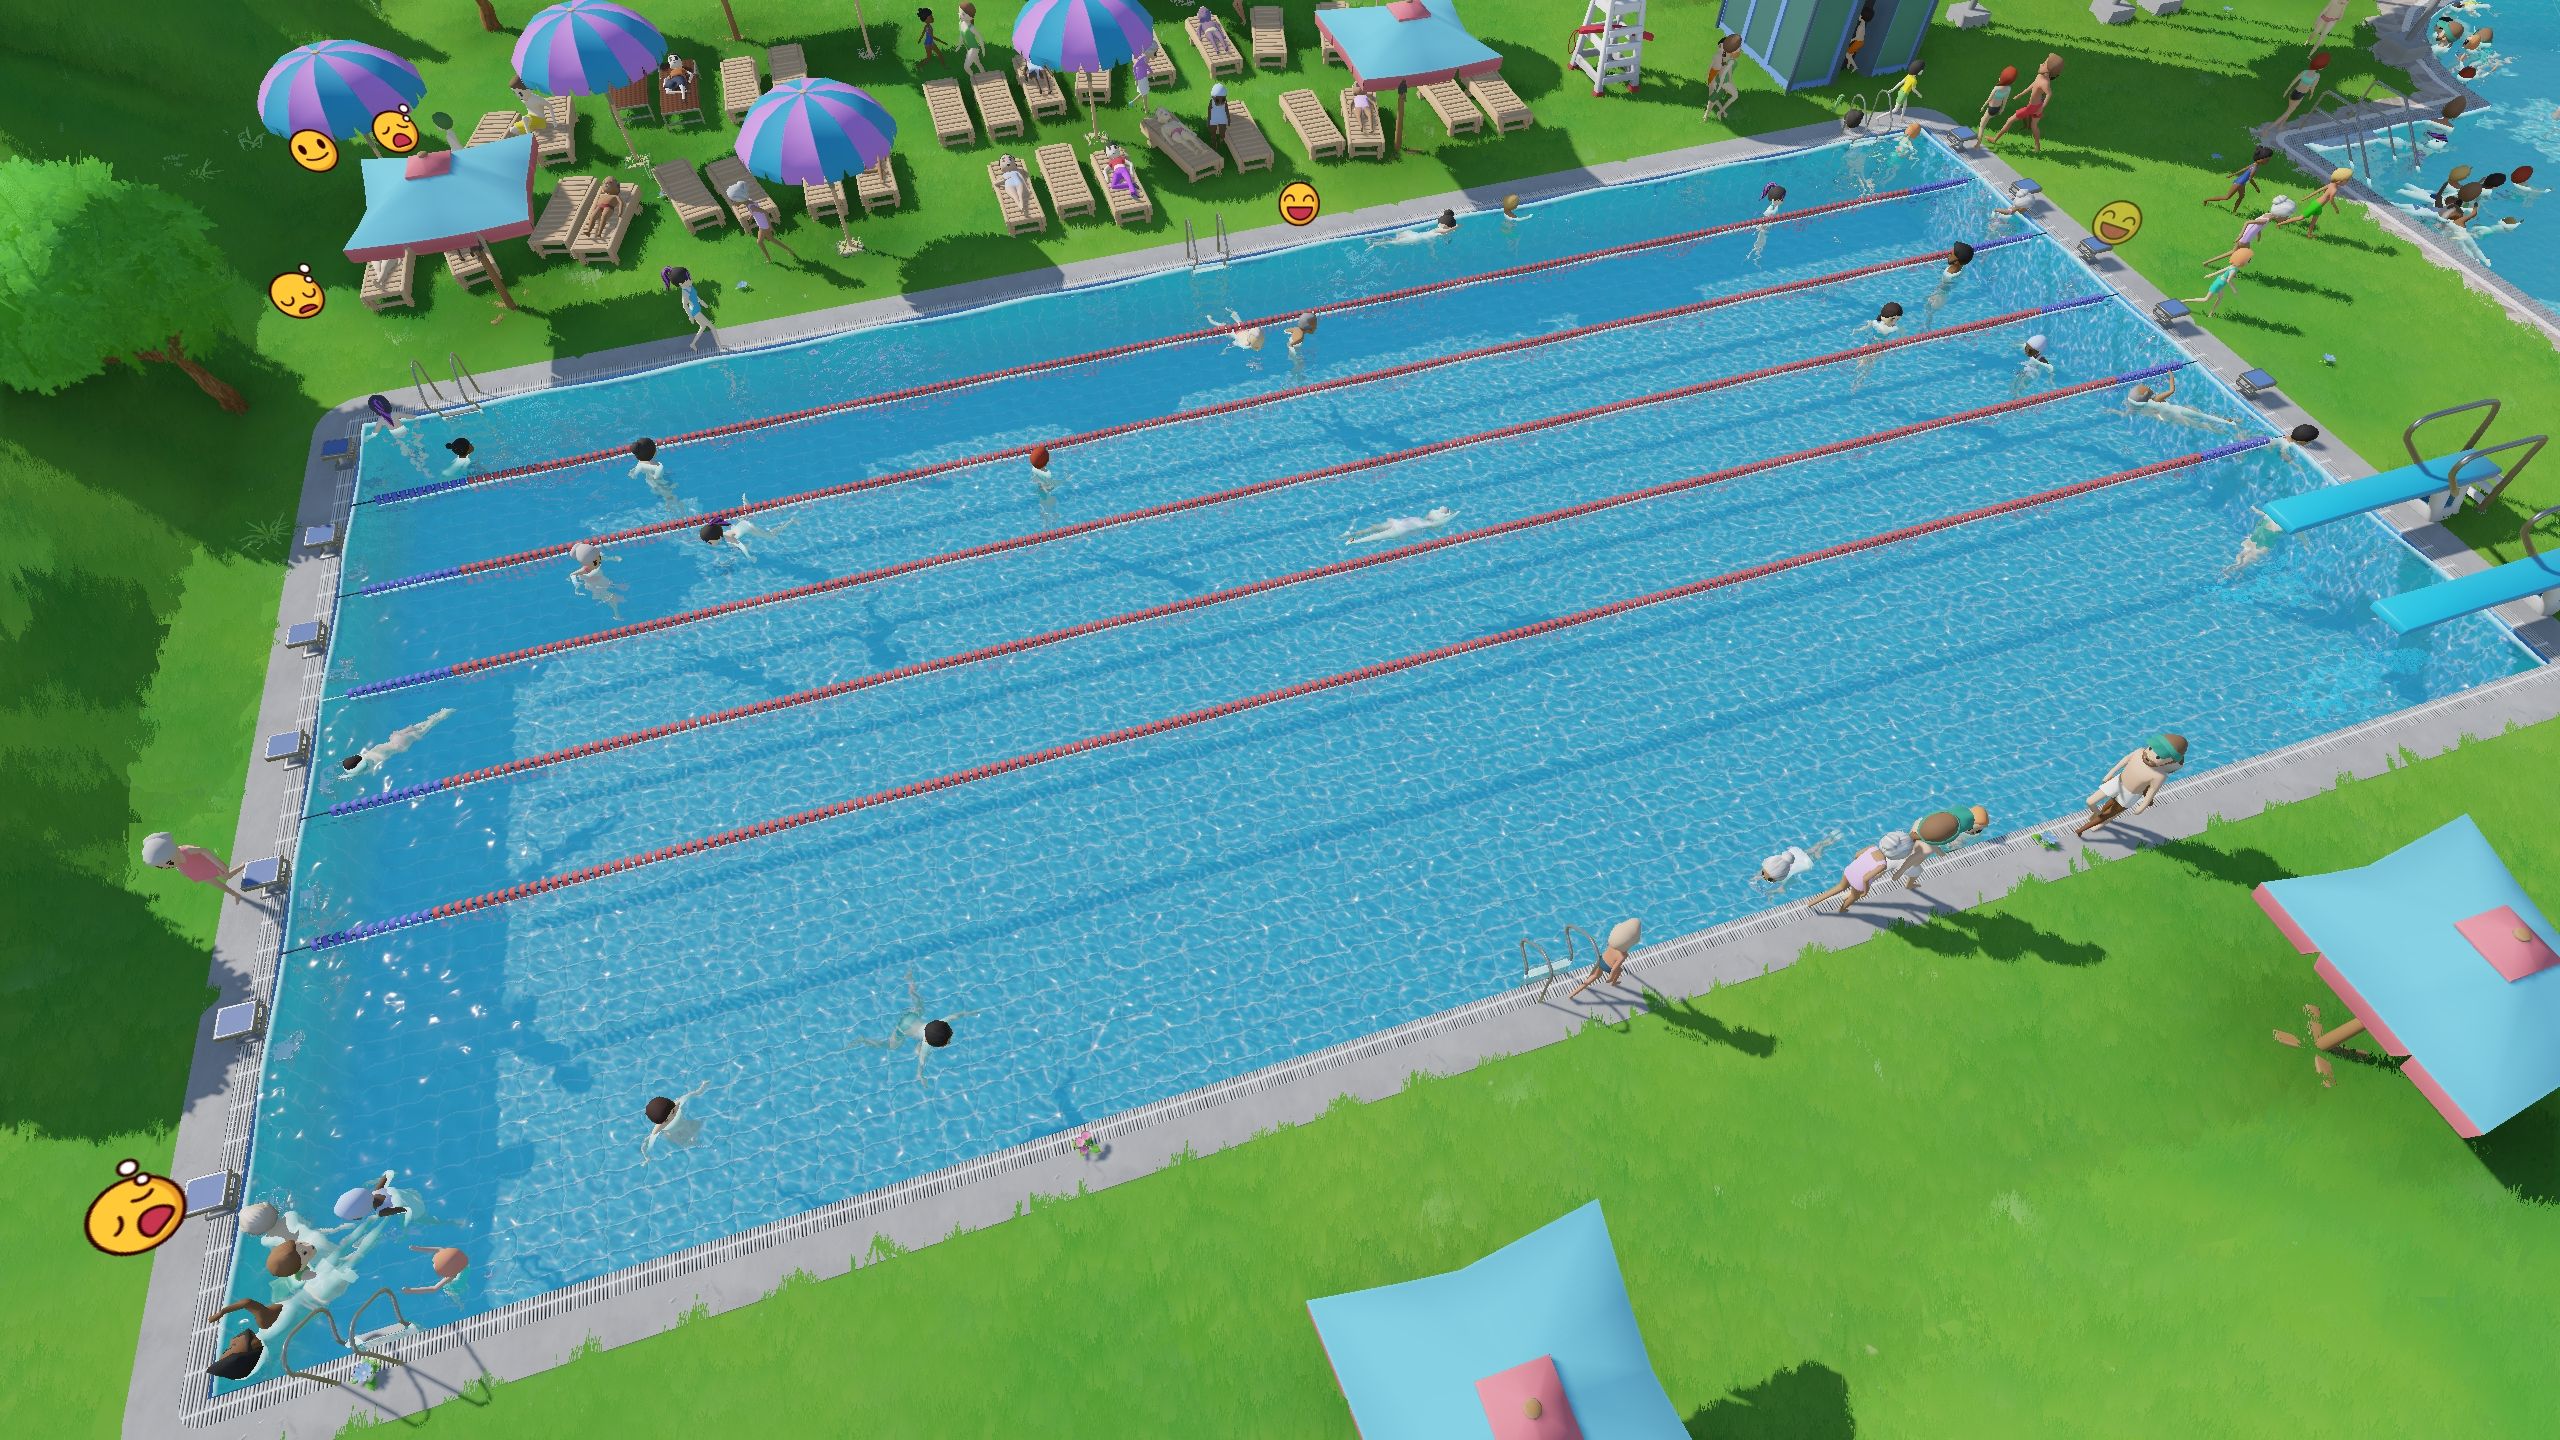 Sports pool with starting blocks, swim lines and sports equipment